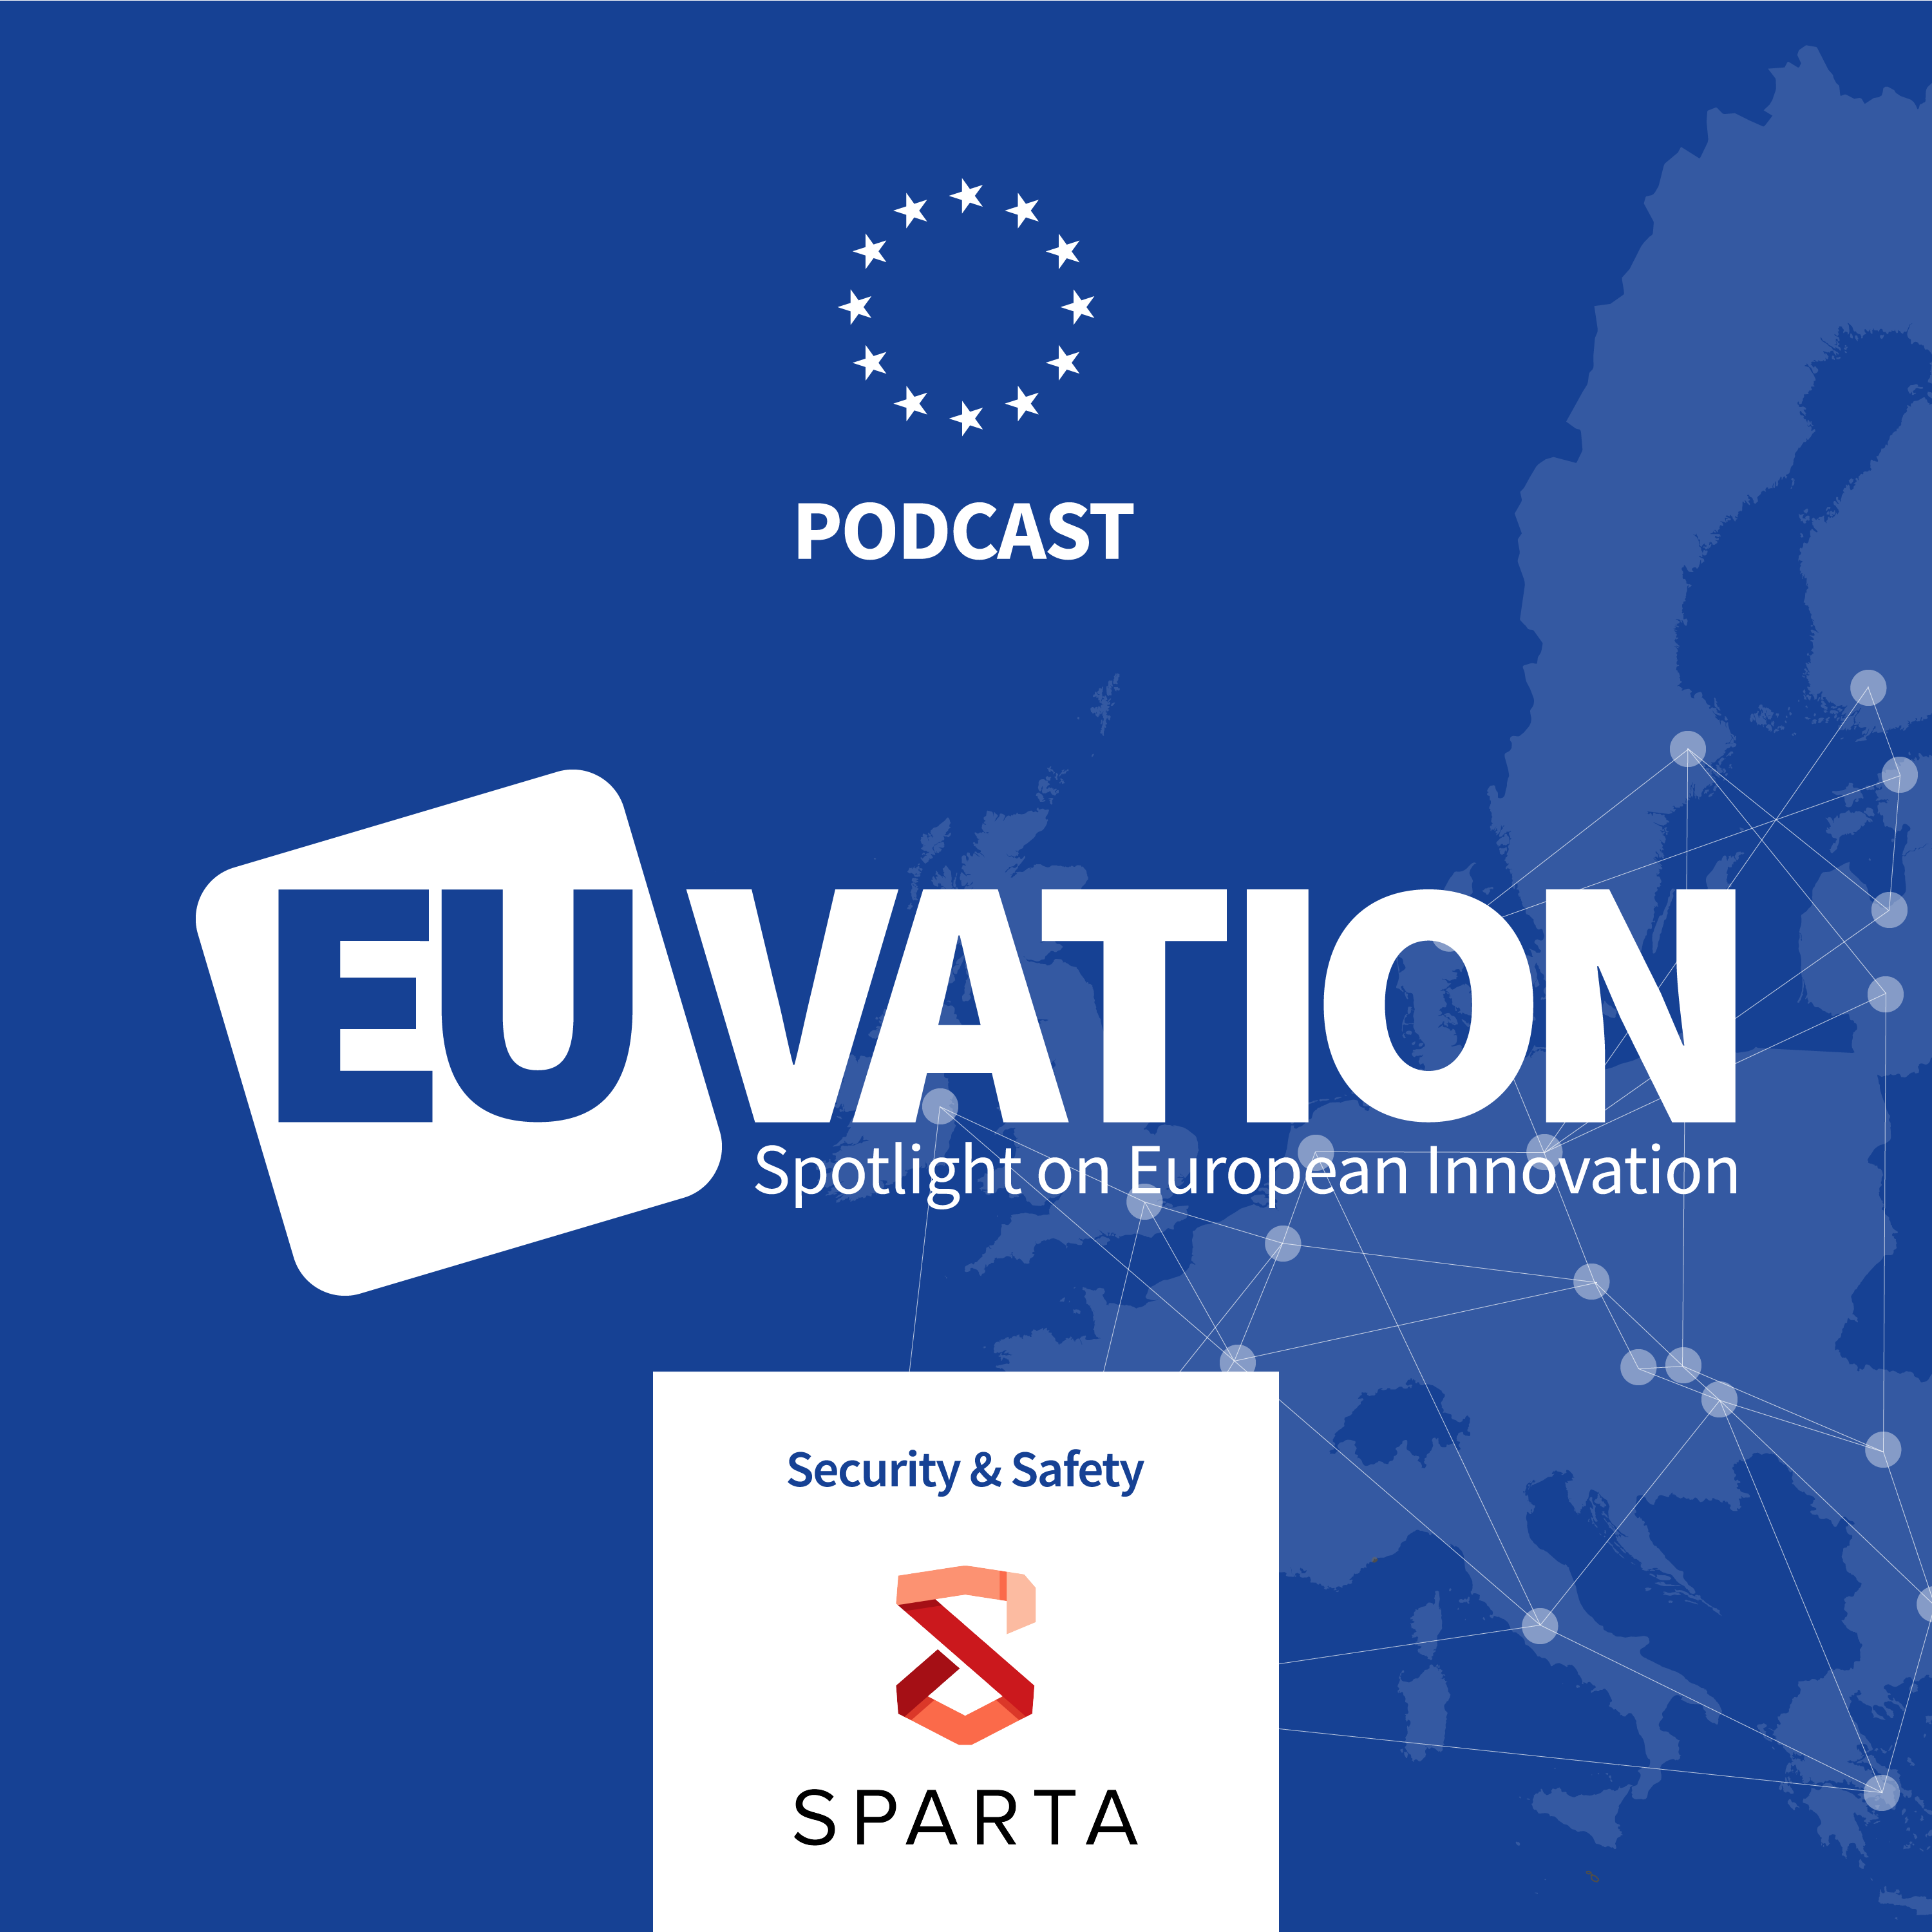 SPARTA (5) H2020 Project: Cyber Security in the EU (part five)